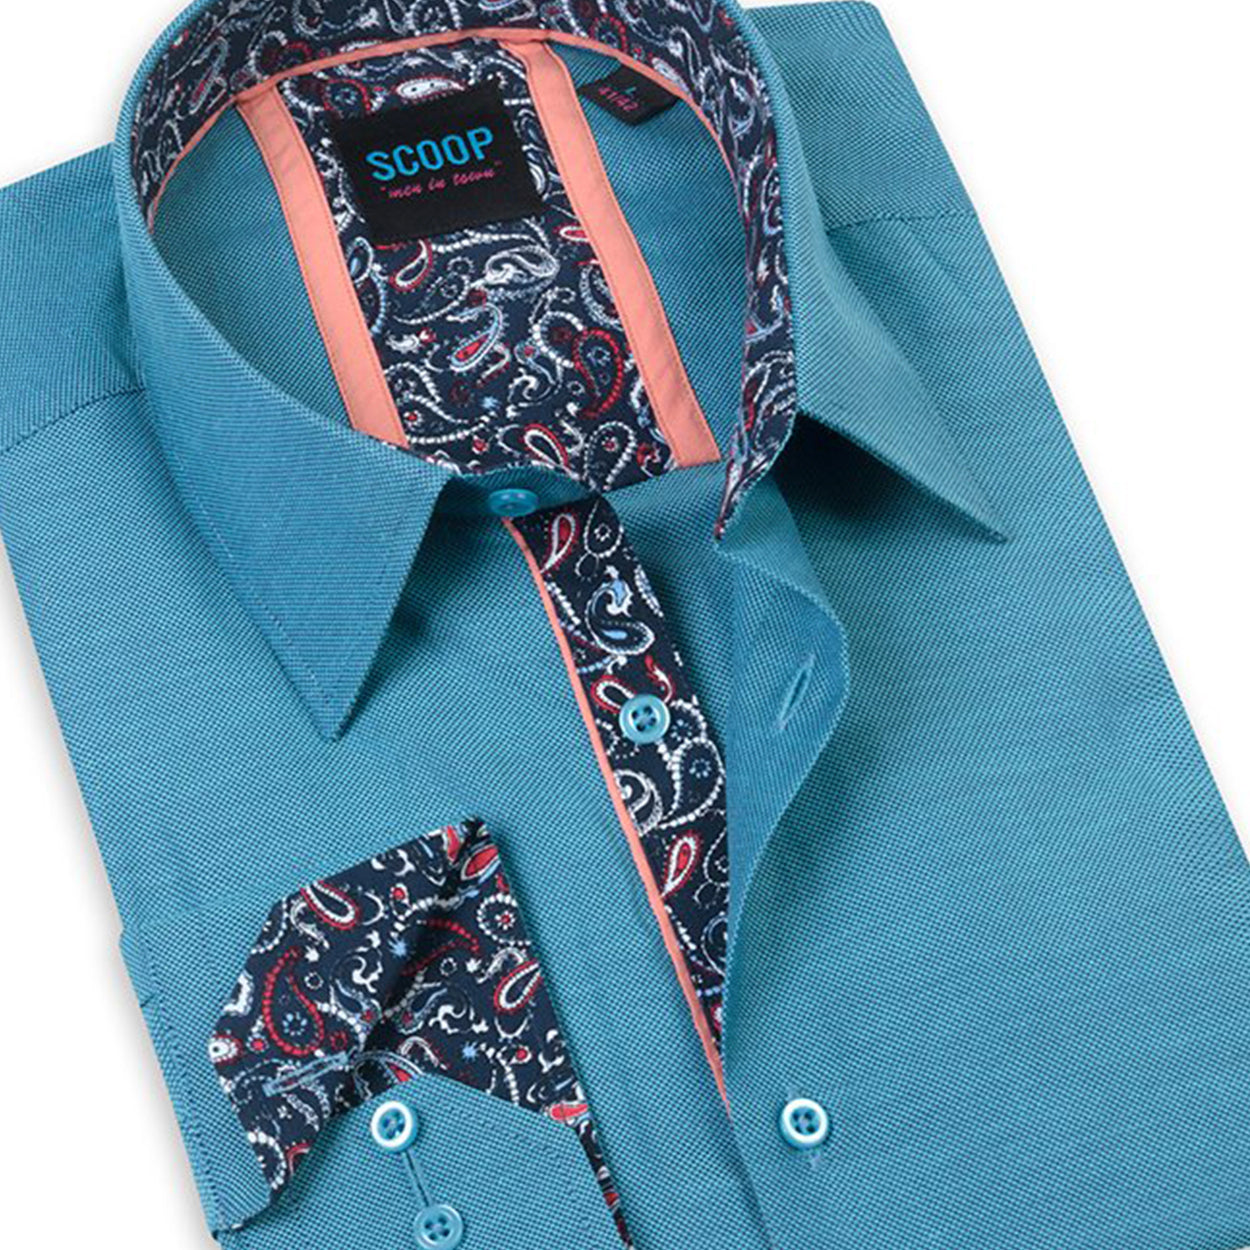 Solid With Contrast Fabric Gordo Teal